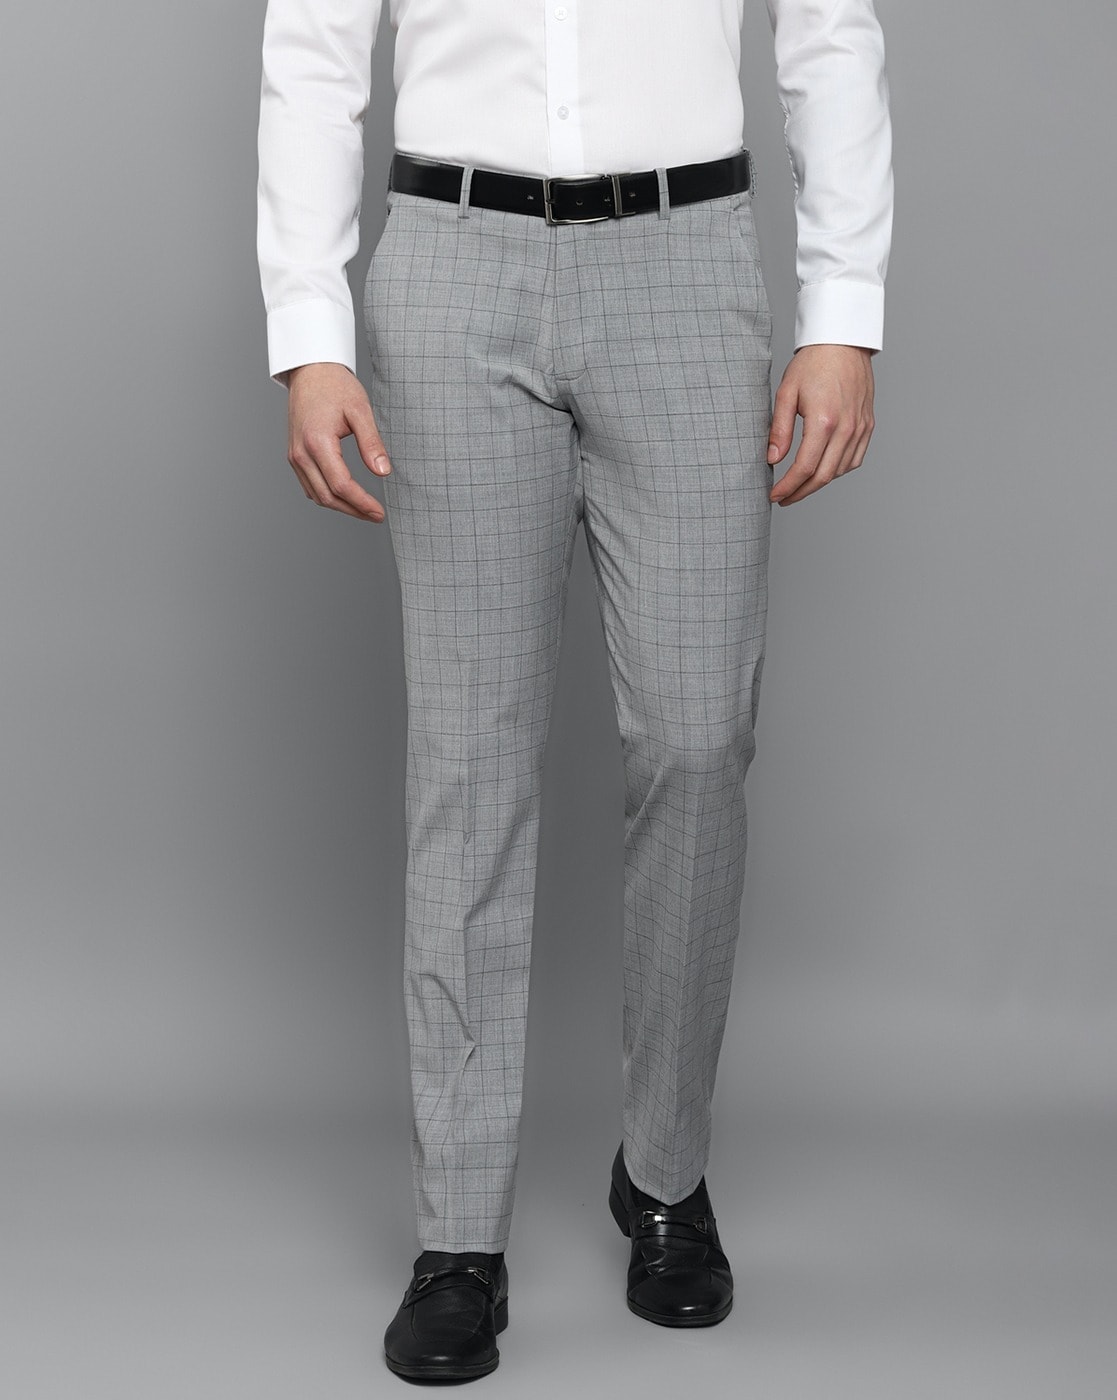 Buy Arrow Twill Tailored Formal Trousers - NNNOW.com